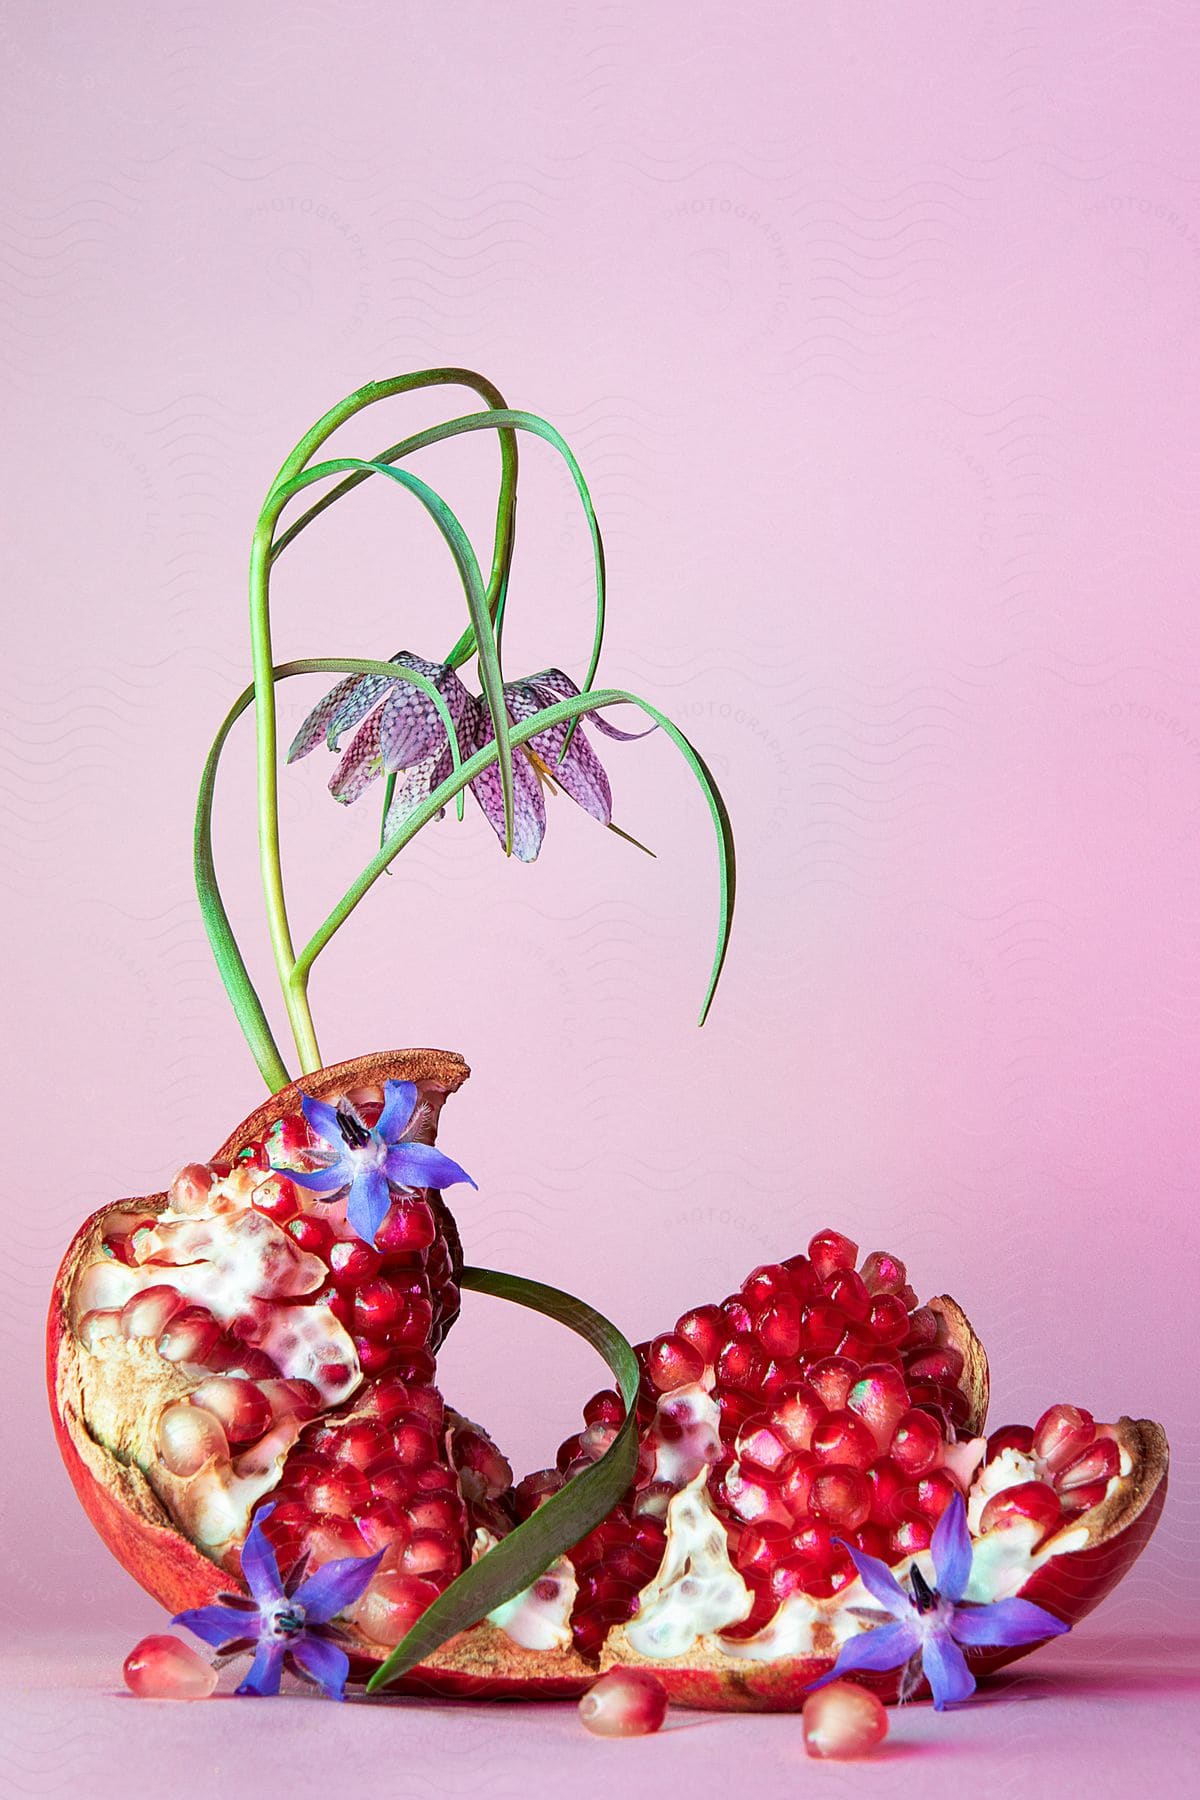 A split pomegranate with seeds spilled out lies on a pink background with purple flowers.